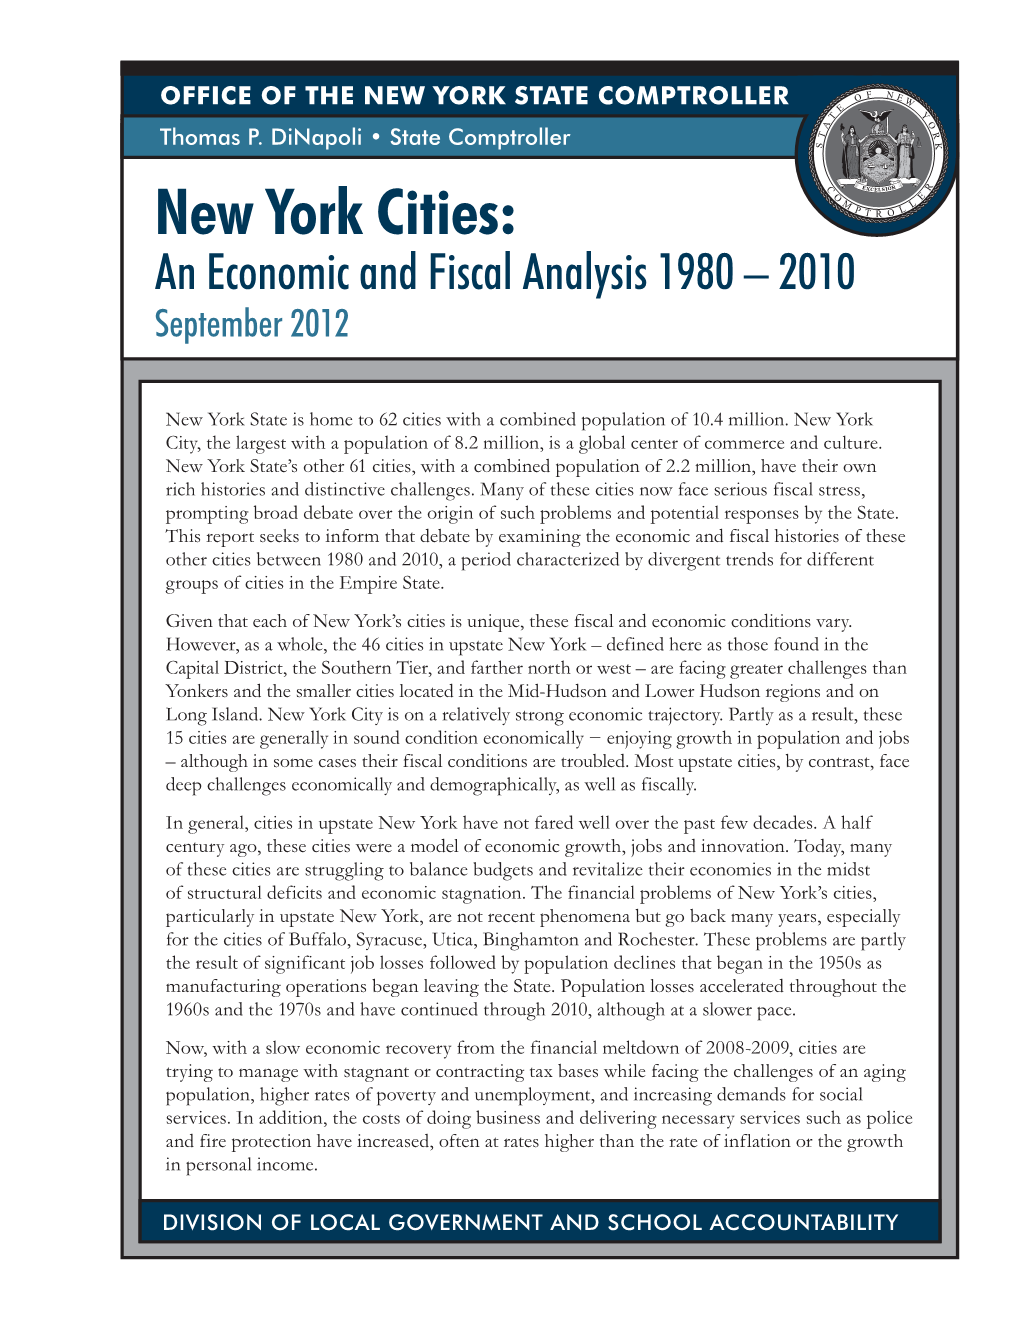 New York Cities: an Economic Fiscal Analysis 1980